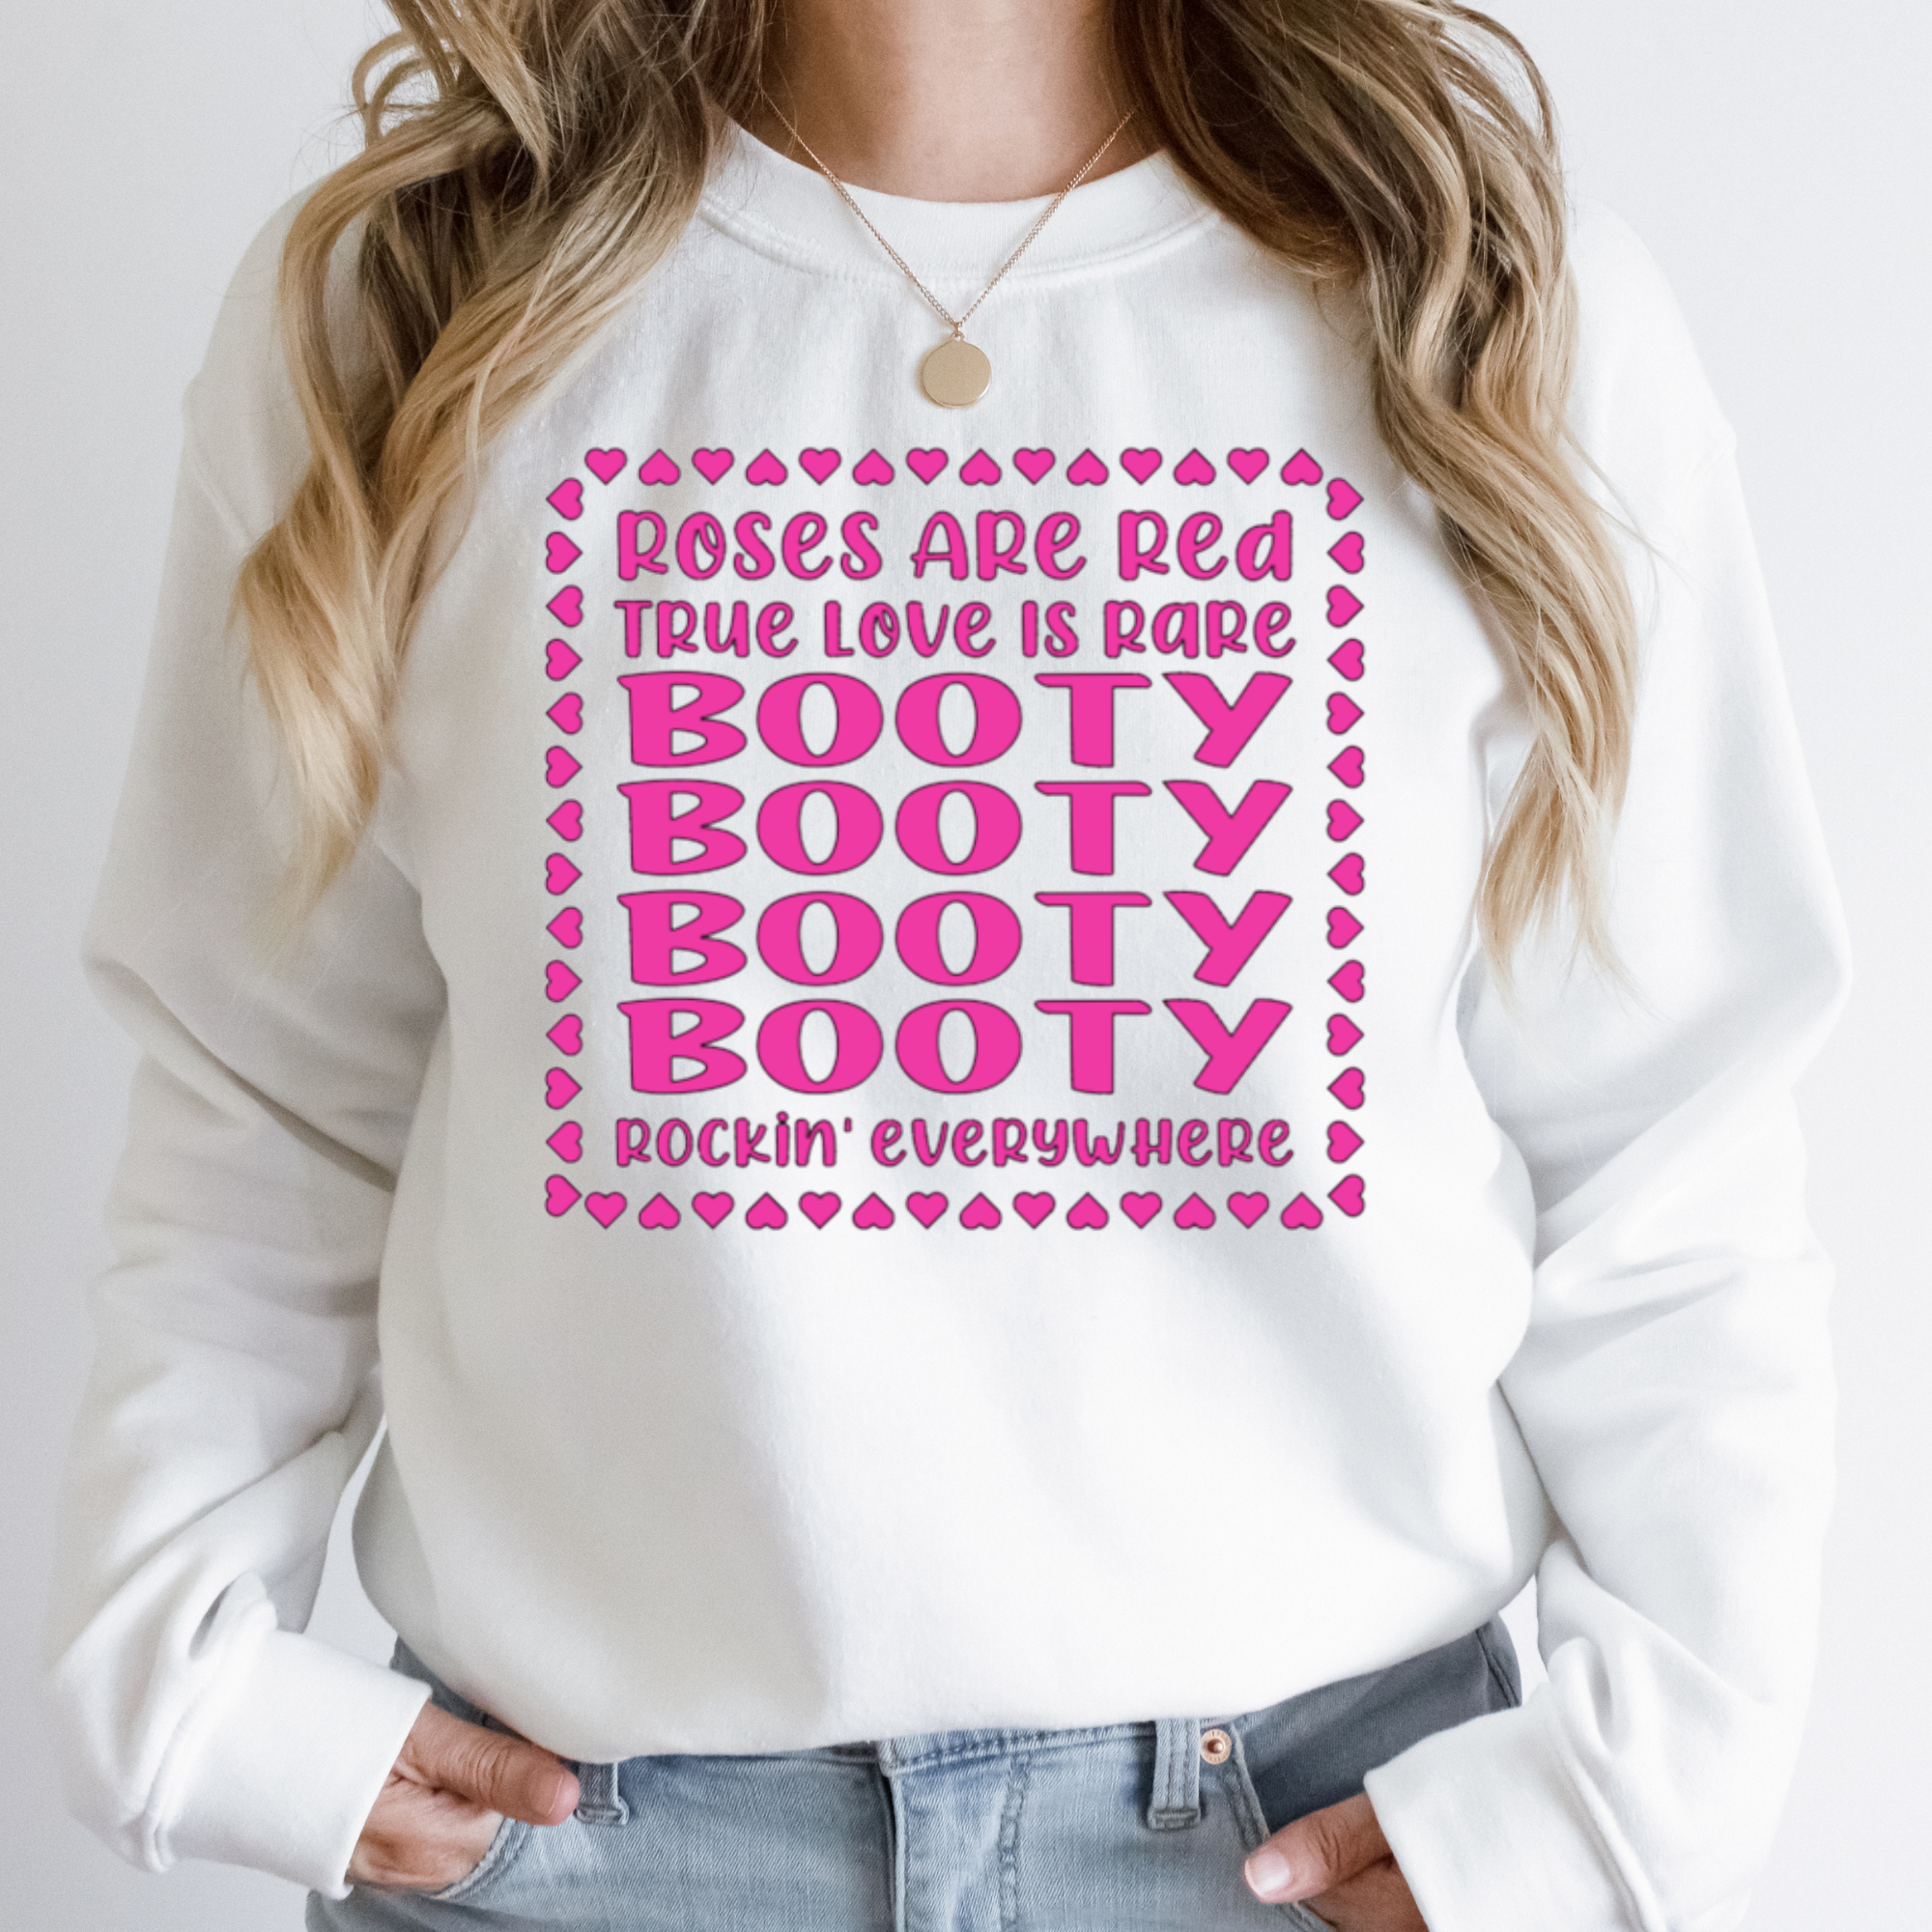 Roses Are Red True Love Is Rare Booty Booty Booty Booty Rockin' Everywhere Shirt